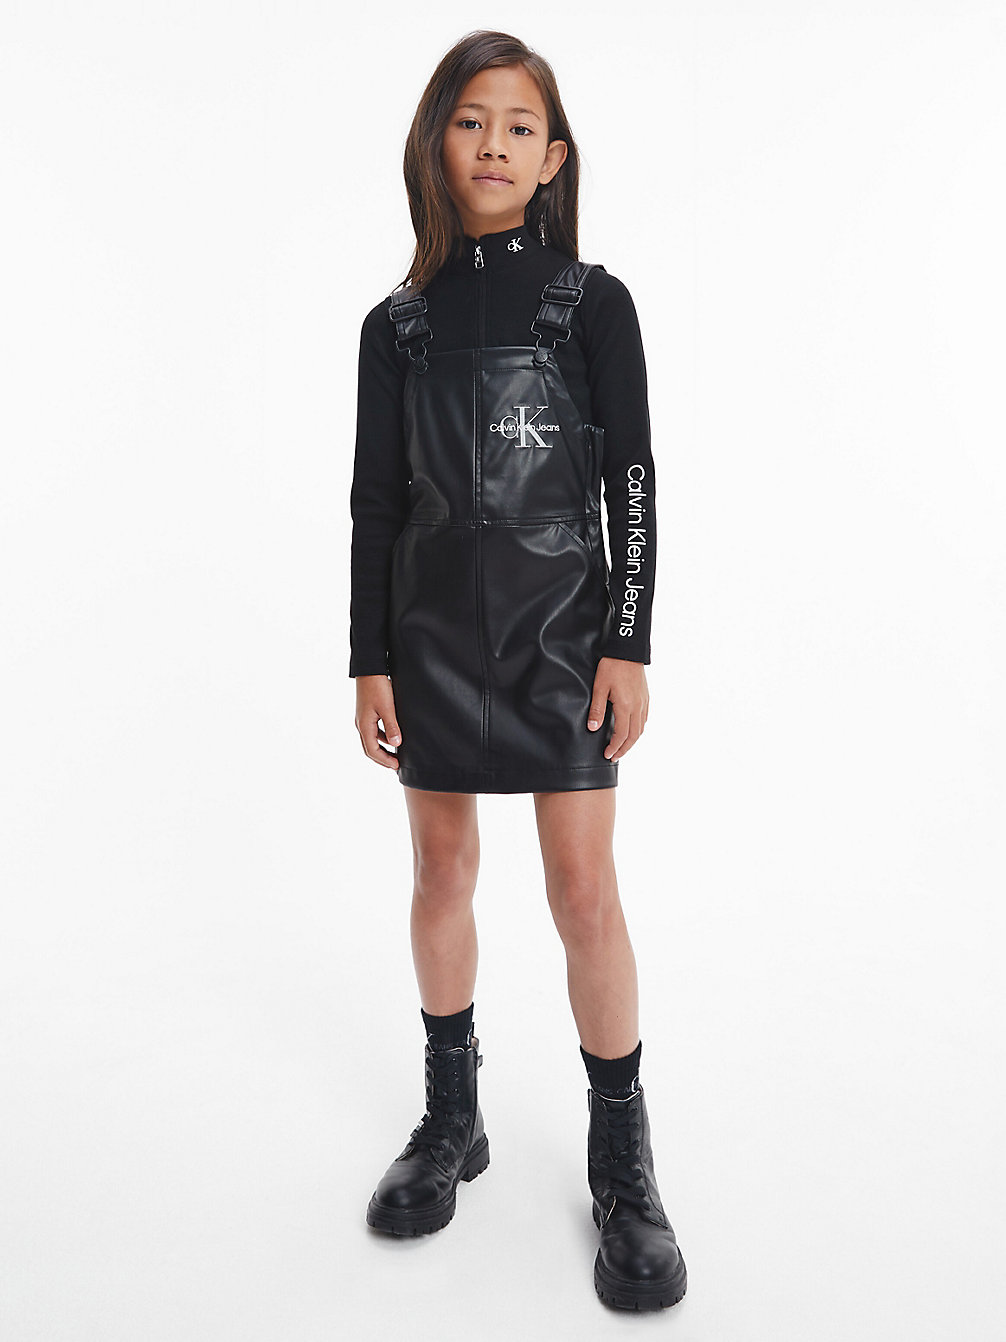 CK BLACK Faux Leather Dungaree Dress undefined girls Calvin Klein